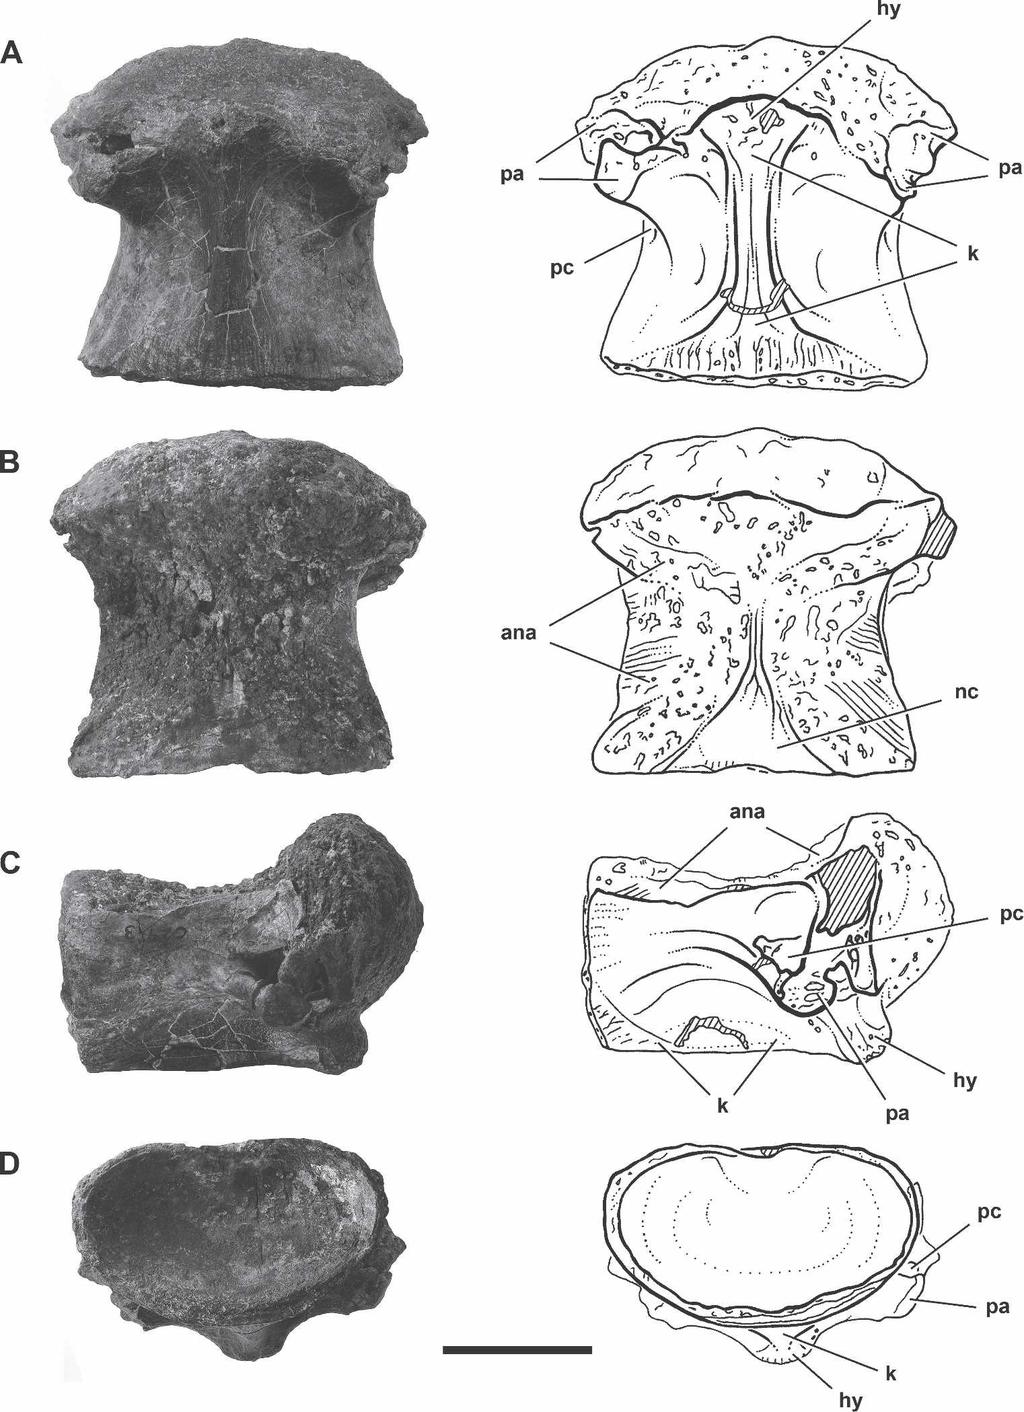 BRUSATTE AND SERENO NEW CARCHARODONTOSAURUS SPECIES 913 FIGURE 9. Photographs and line drawings of a cervical centrum of Carcharodontosaurus iguidensis n. sp. (MNN IGU11).